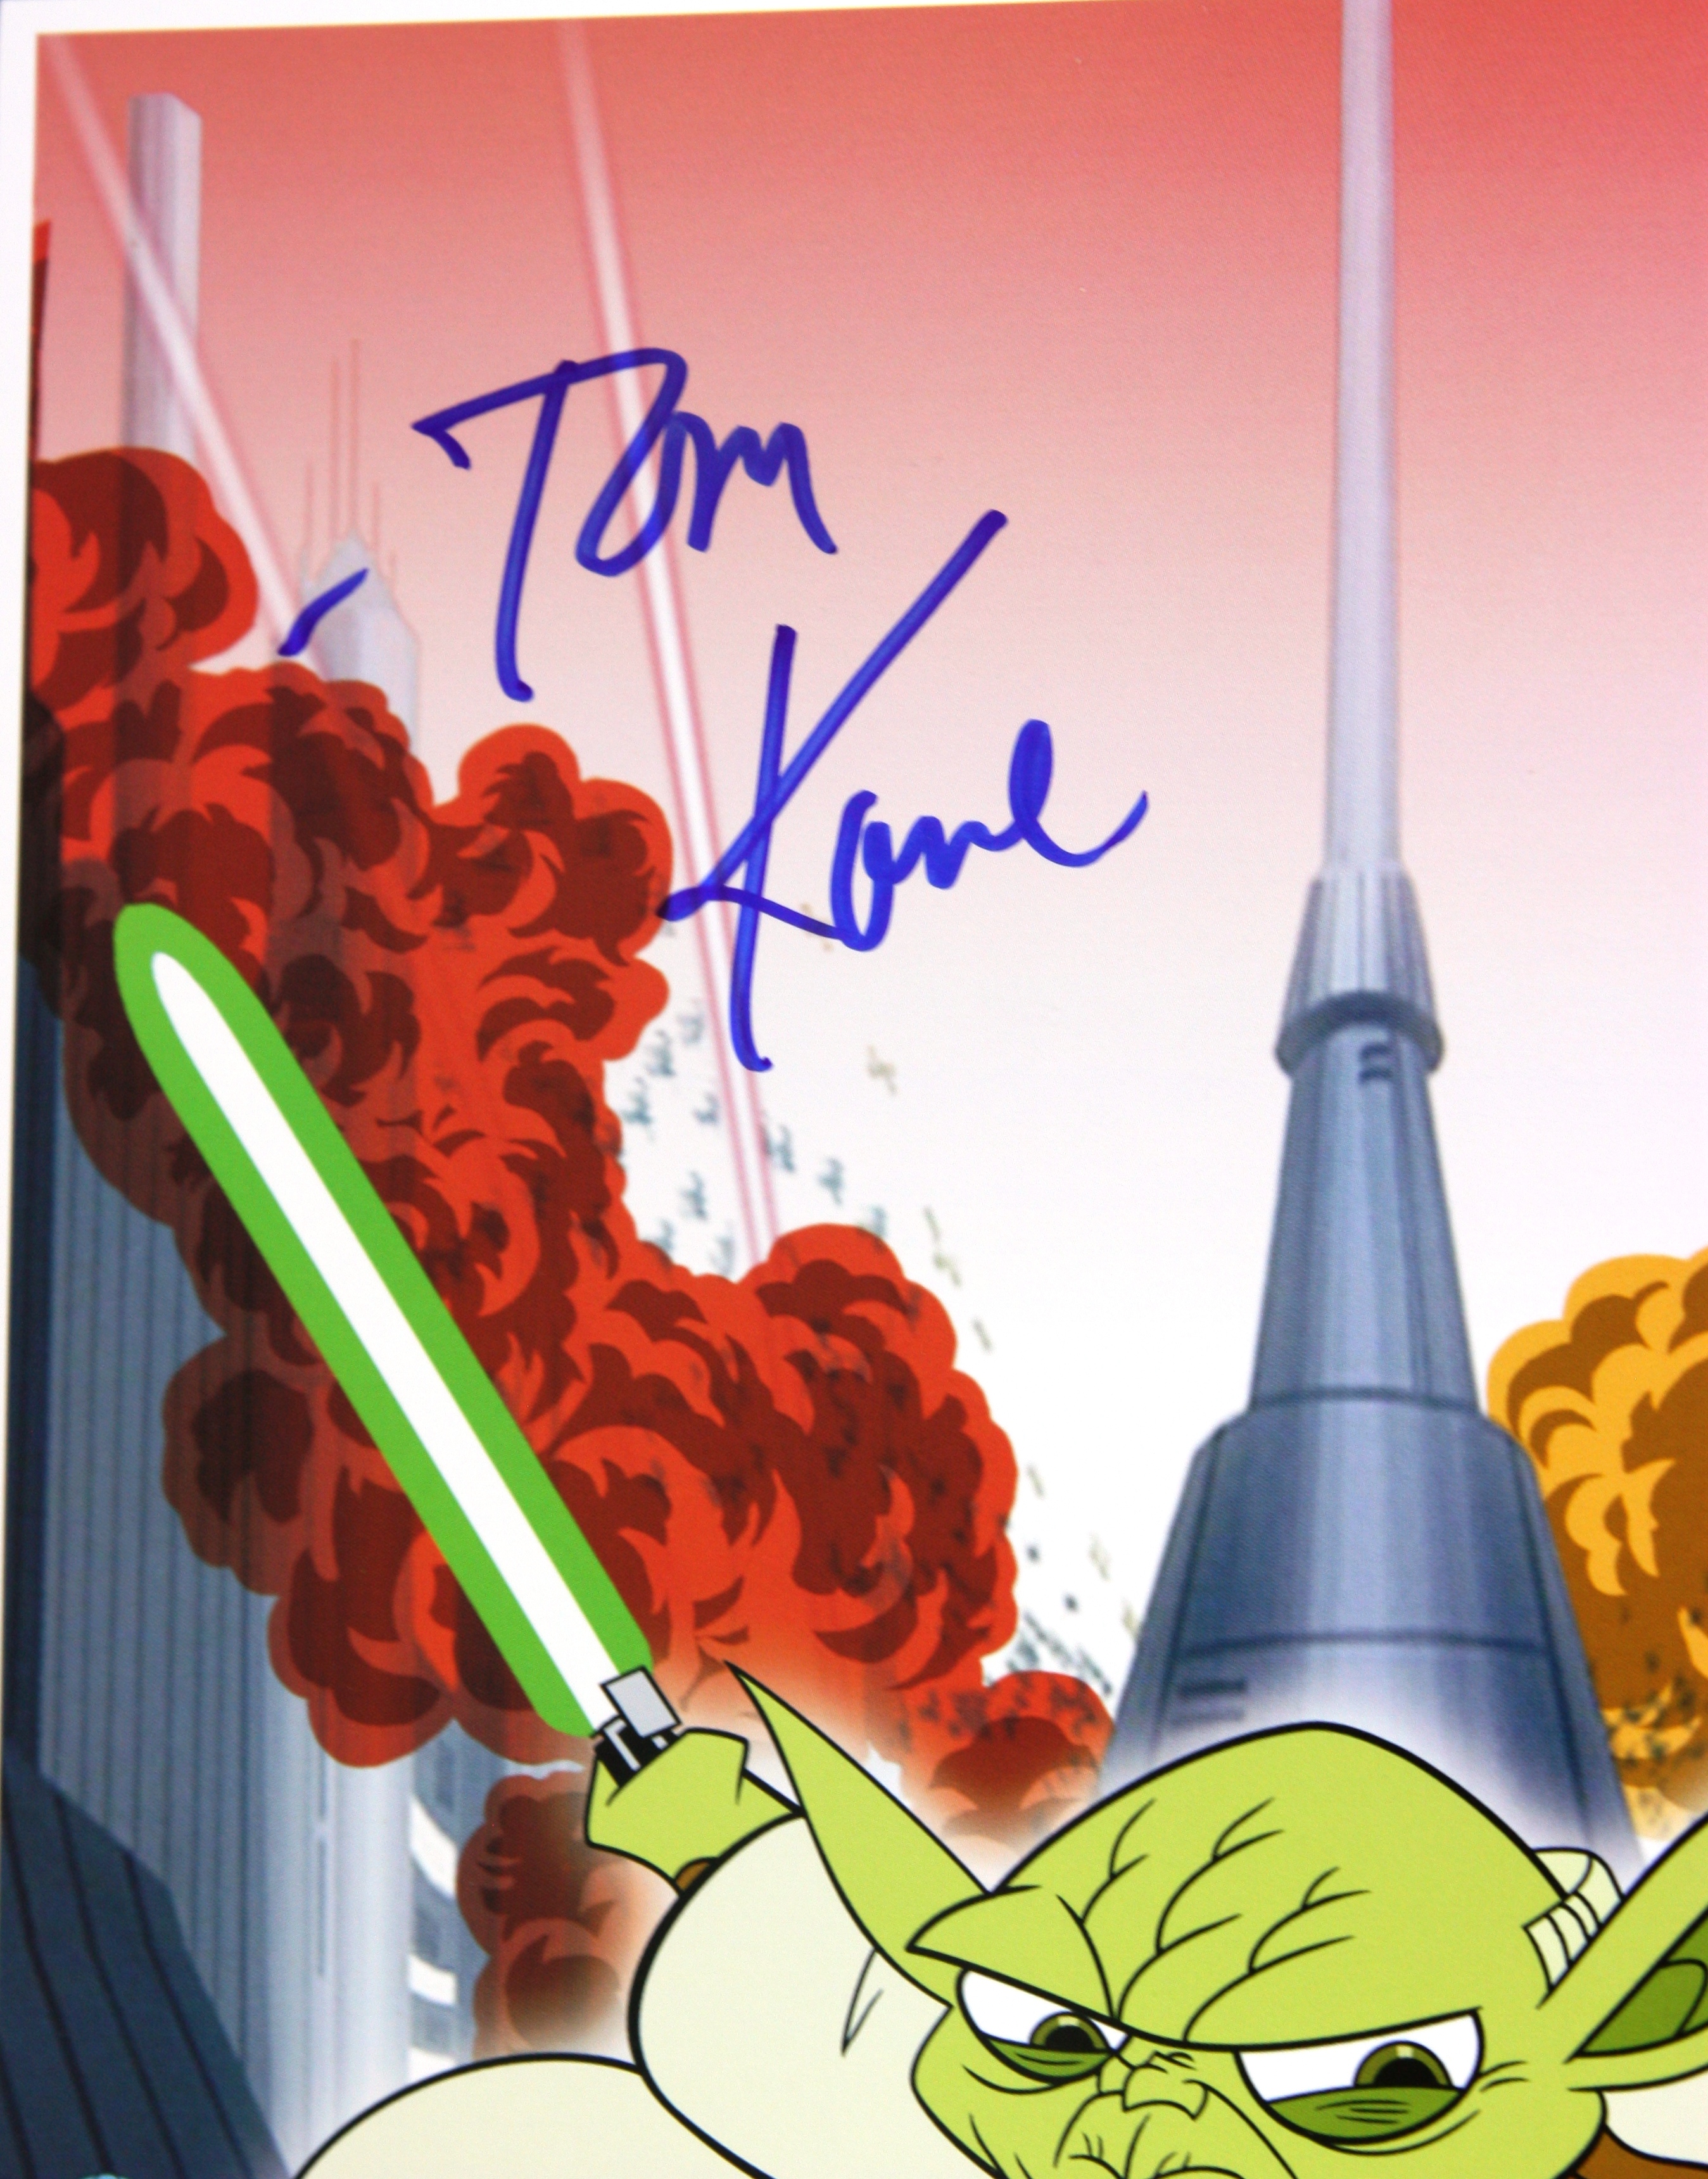 STAR WARS - THE CLONE WARS - TOM KANE (VOICE) - OFFICIAL PIX 8X10" - Image 2 of 2